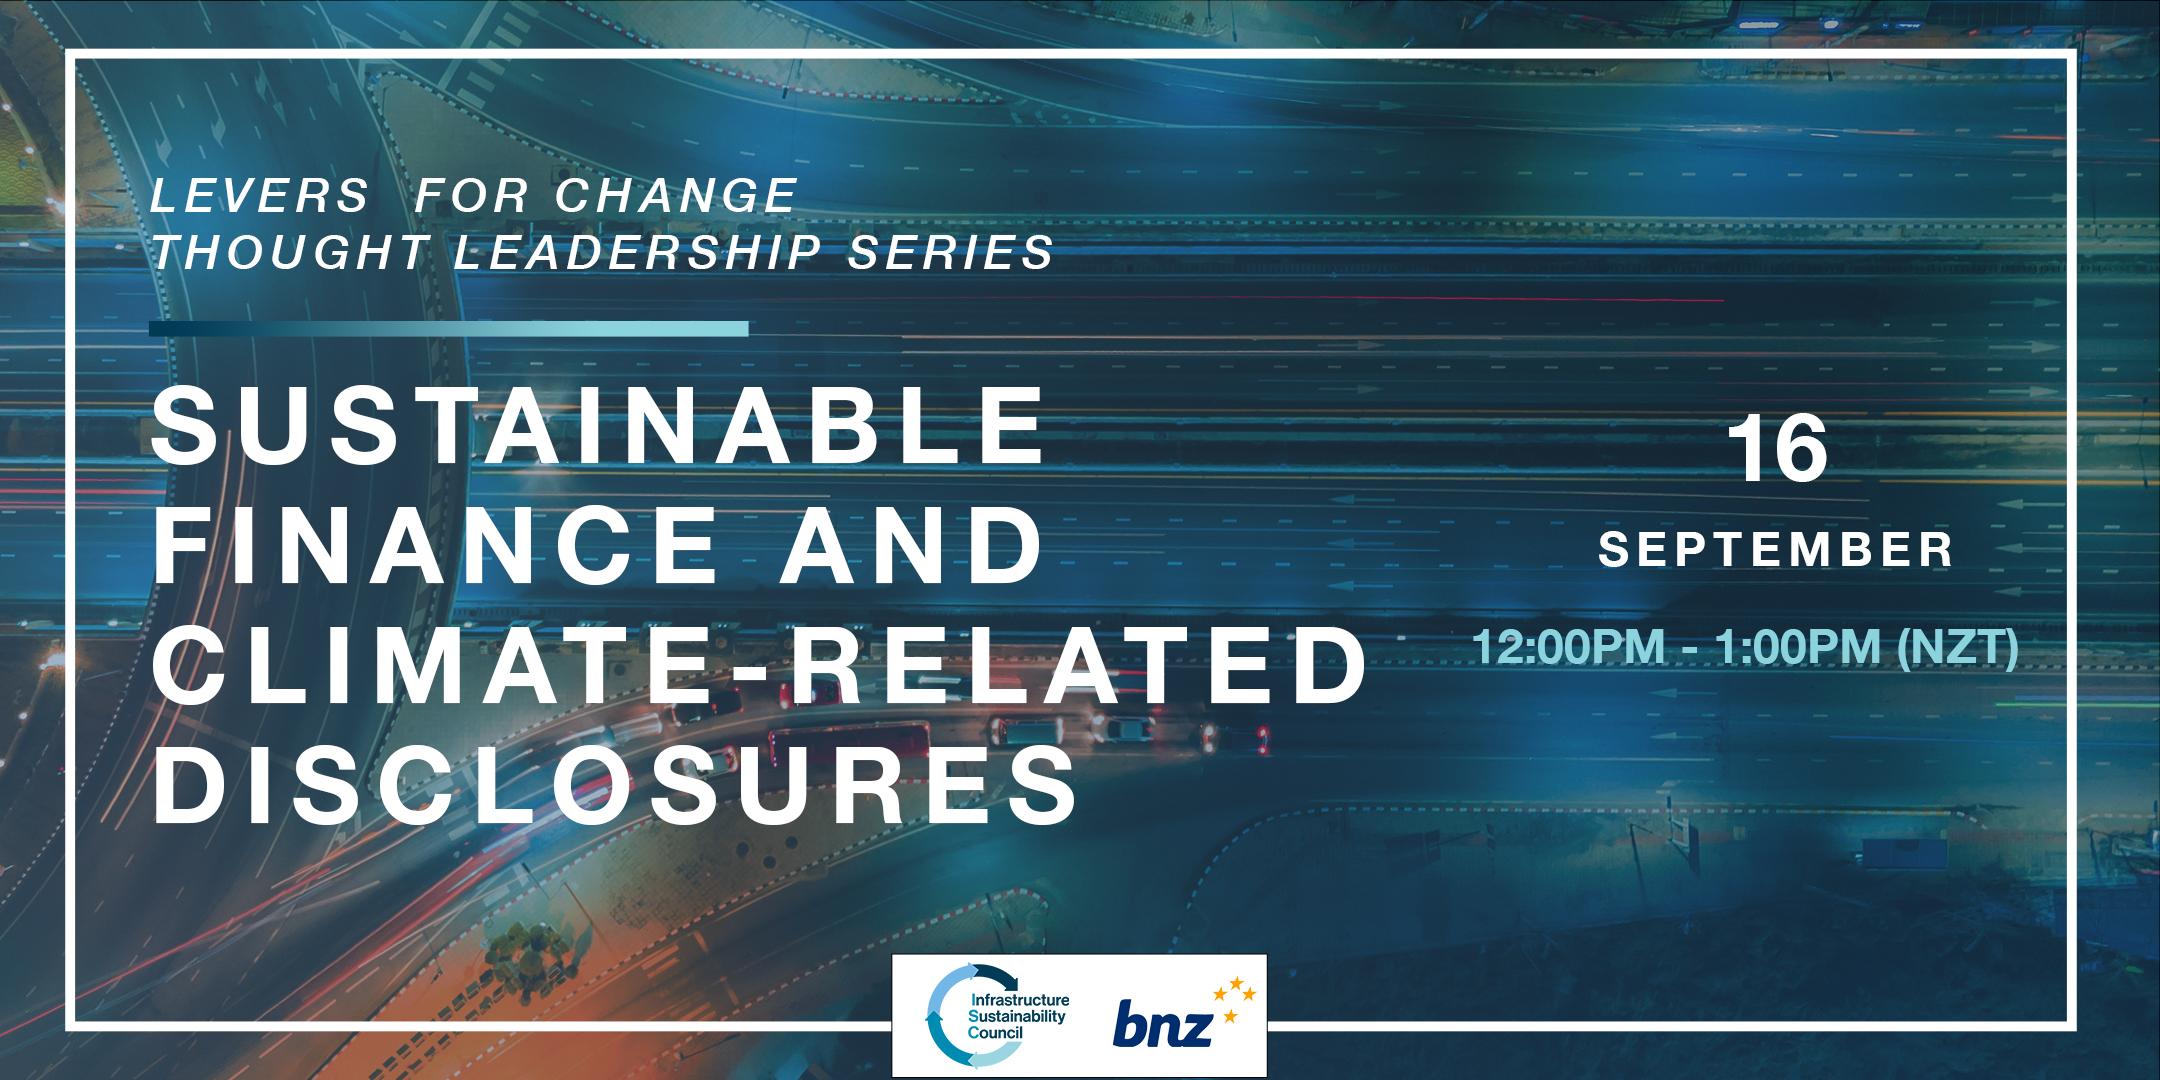 Levers for change series – Sustainable Finance and Climate-Related Disclosures